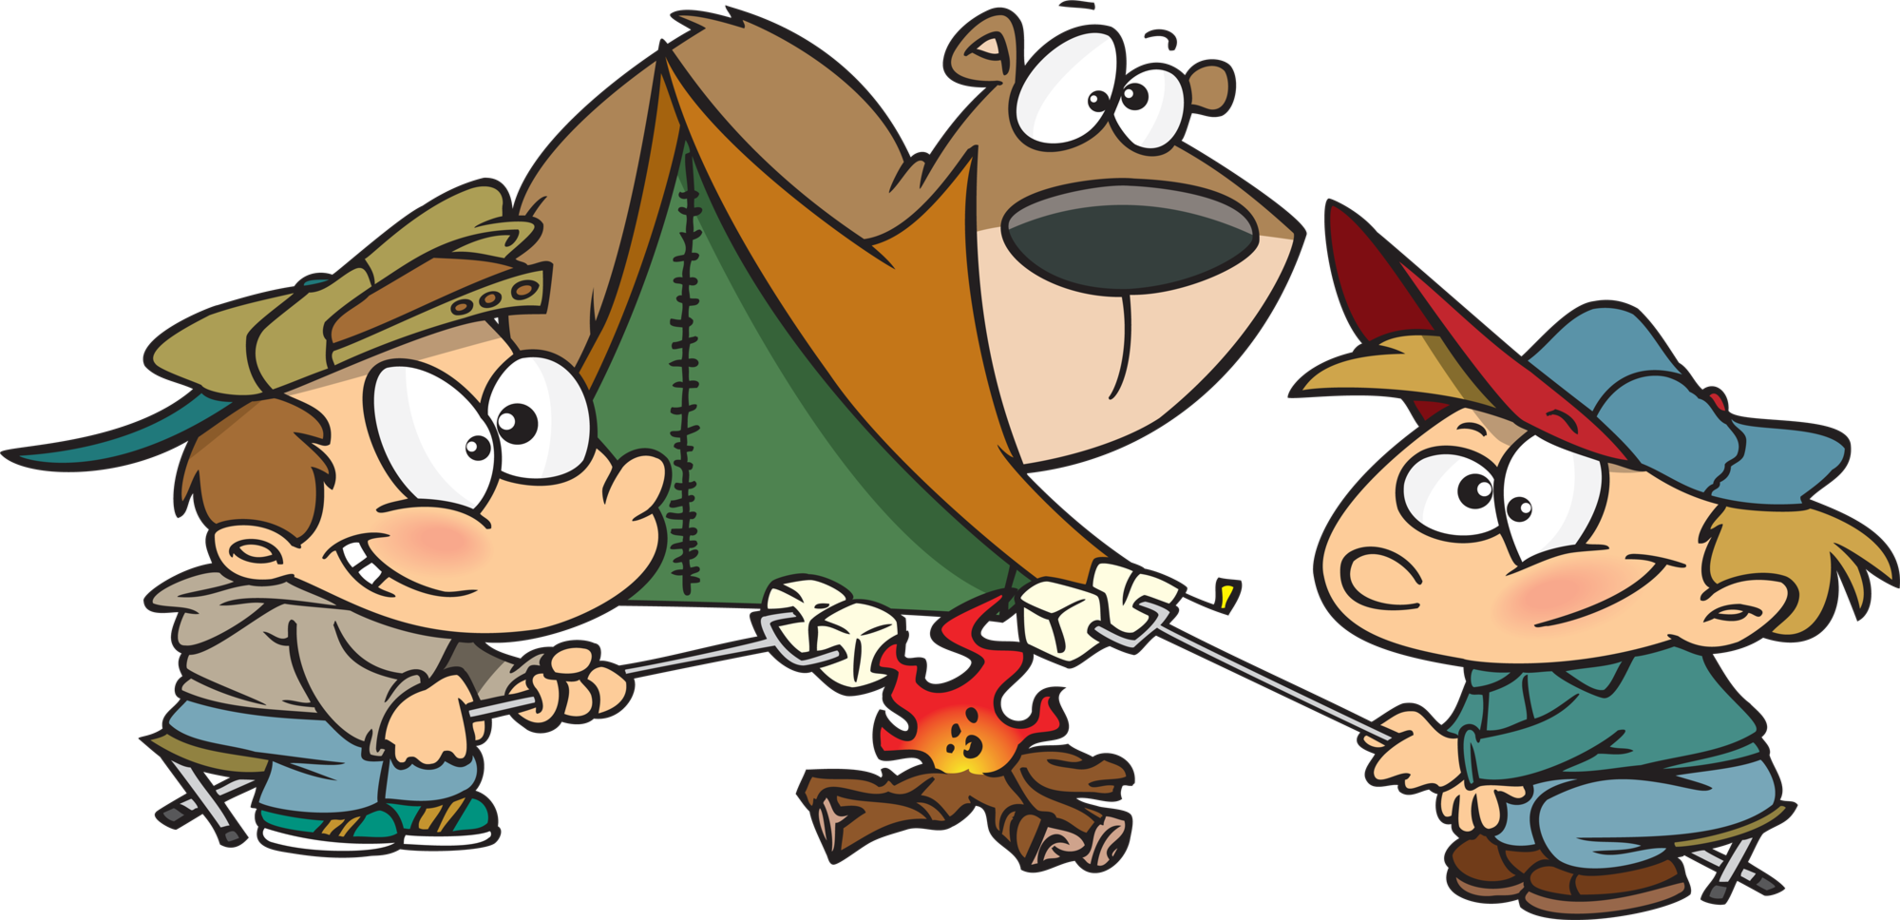 free clipart images camping - photo #7